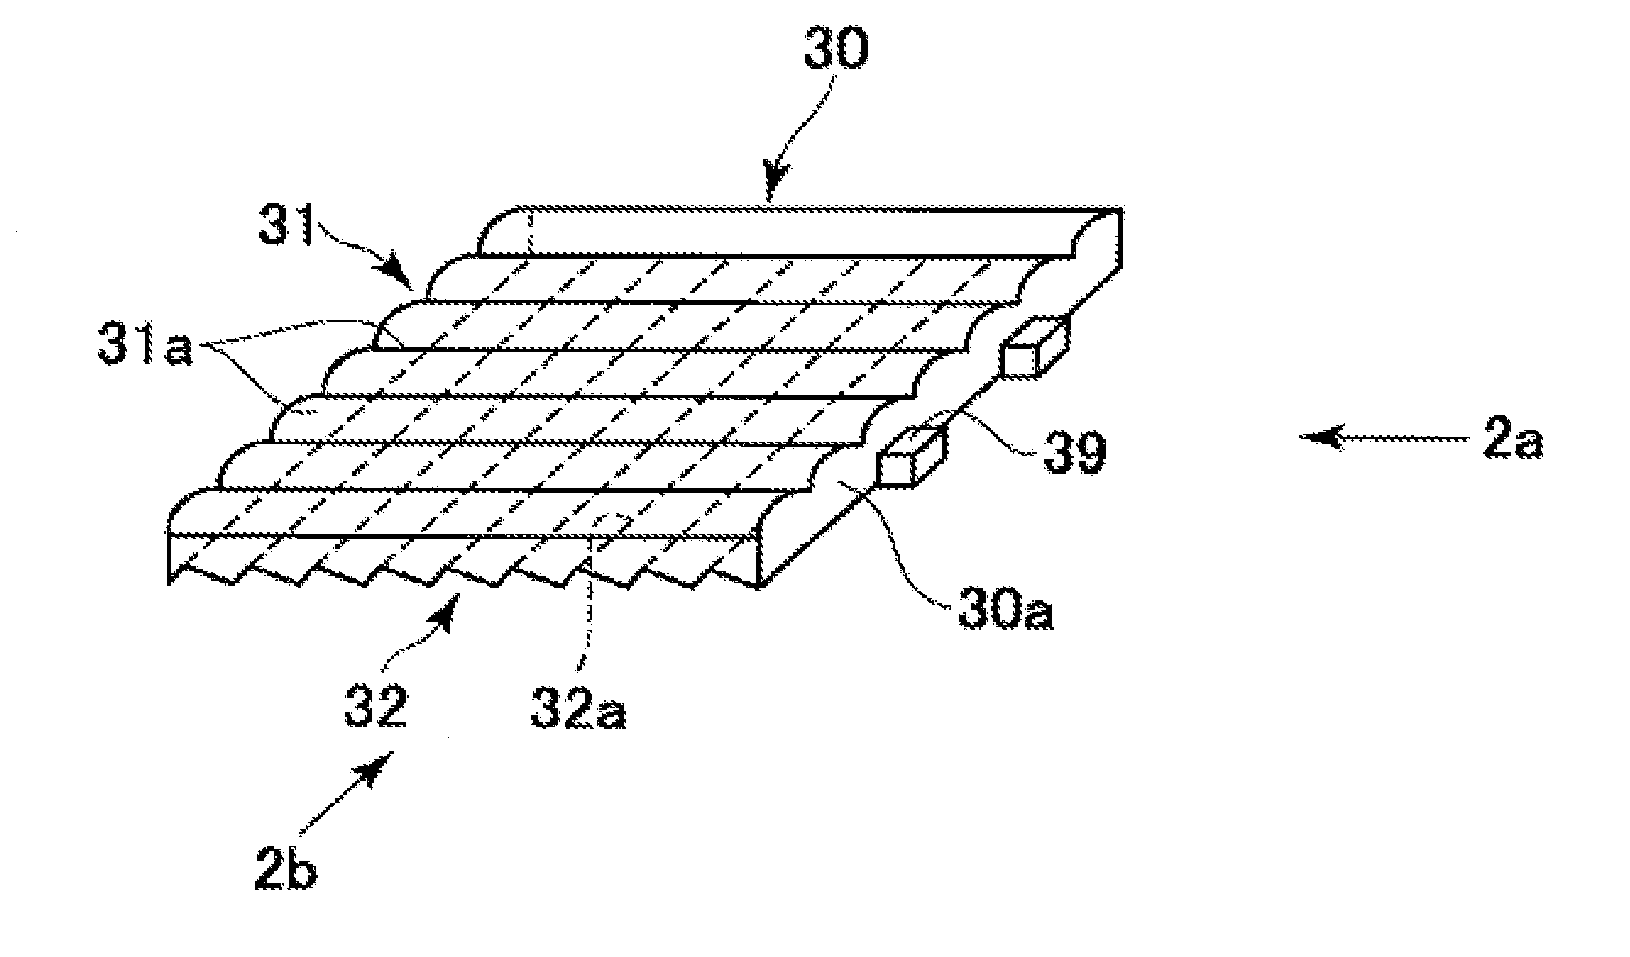 Lightguide plate, method of manufacturing light guide plate, and backlight unit with the light guide plate